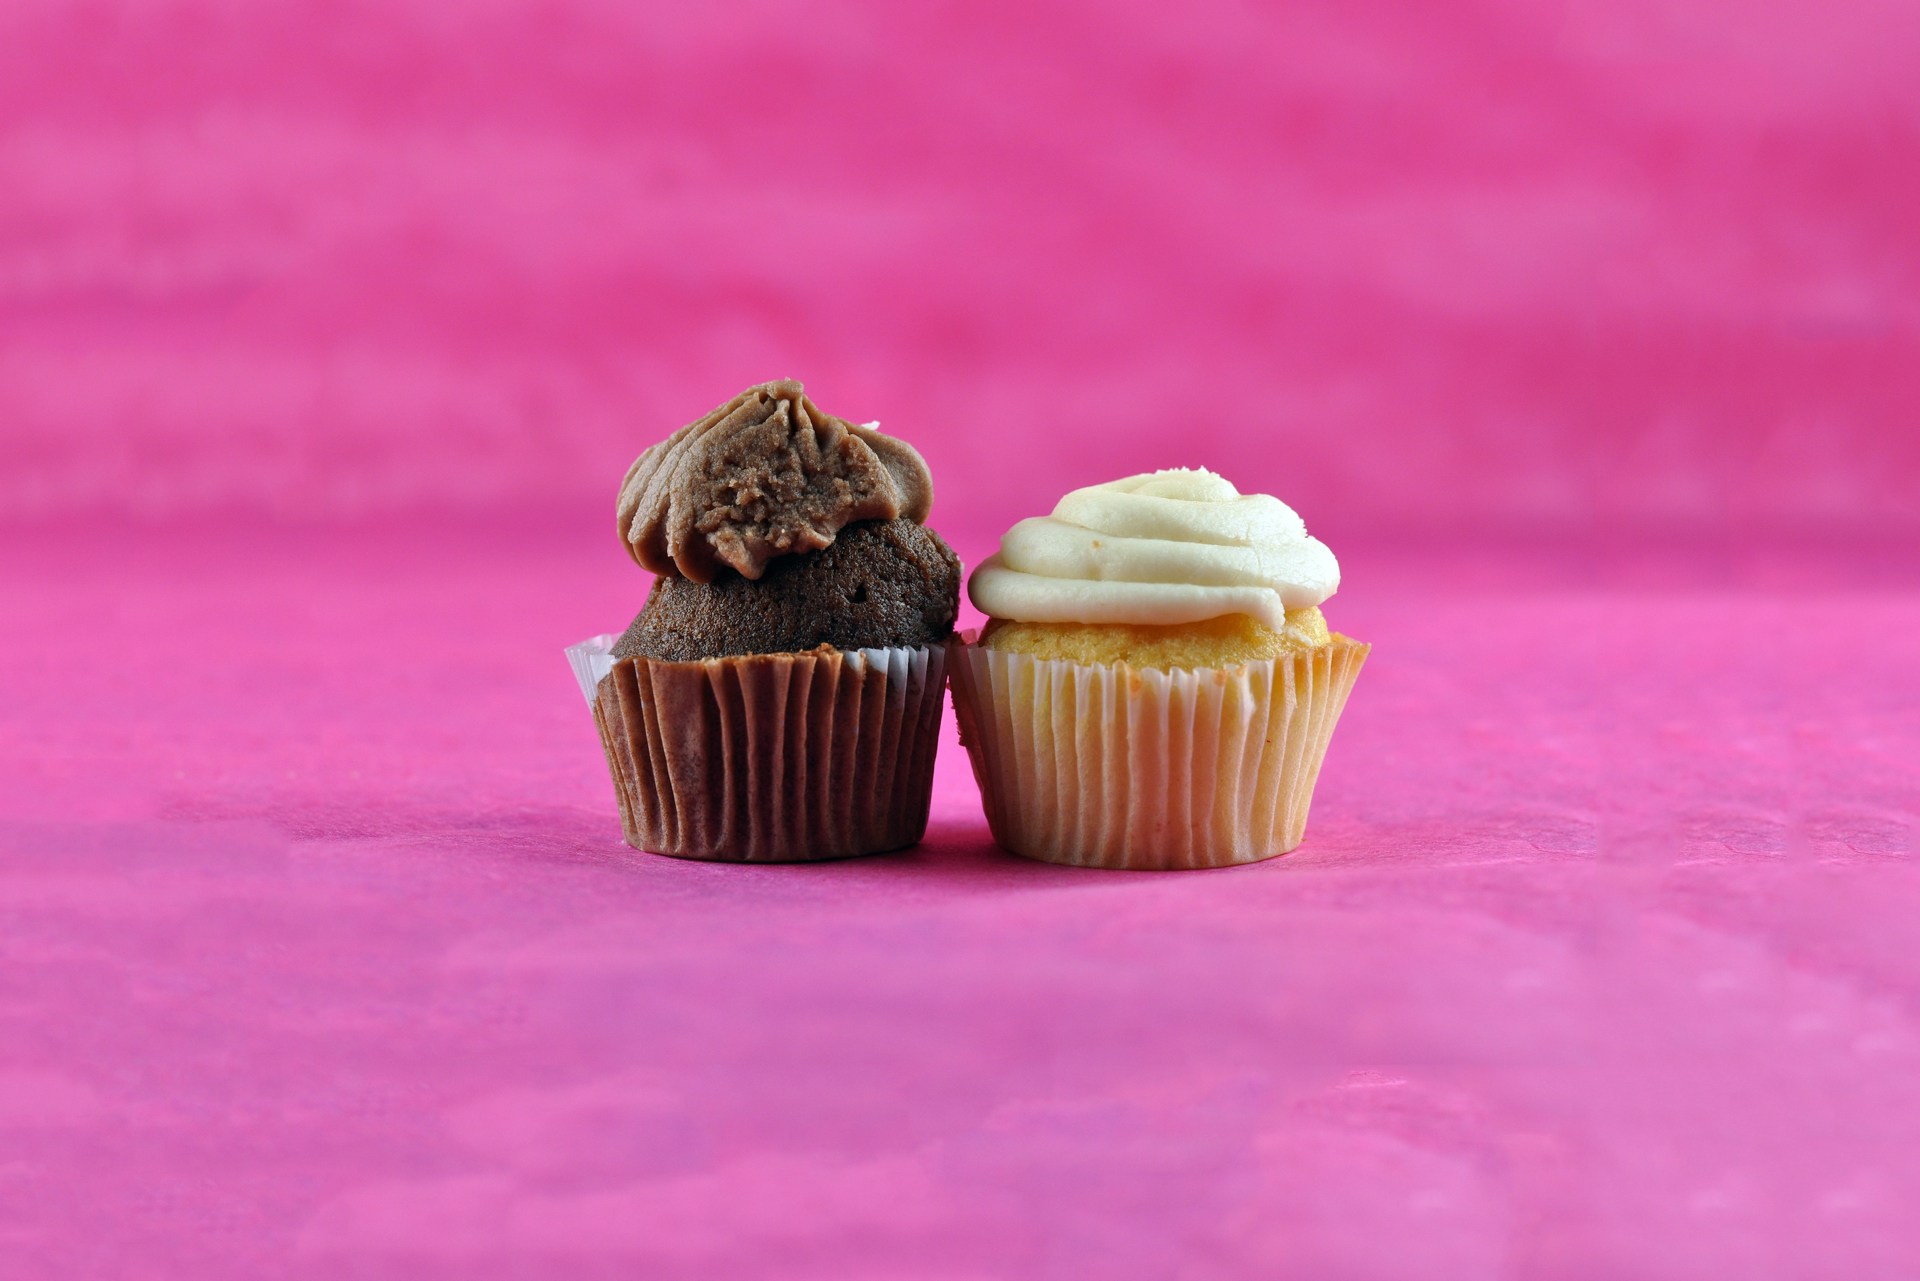 Photography of two cupcakes side by side